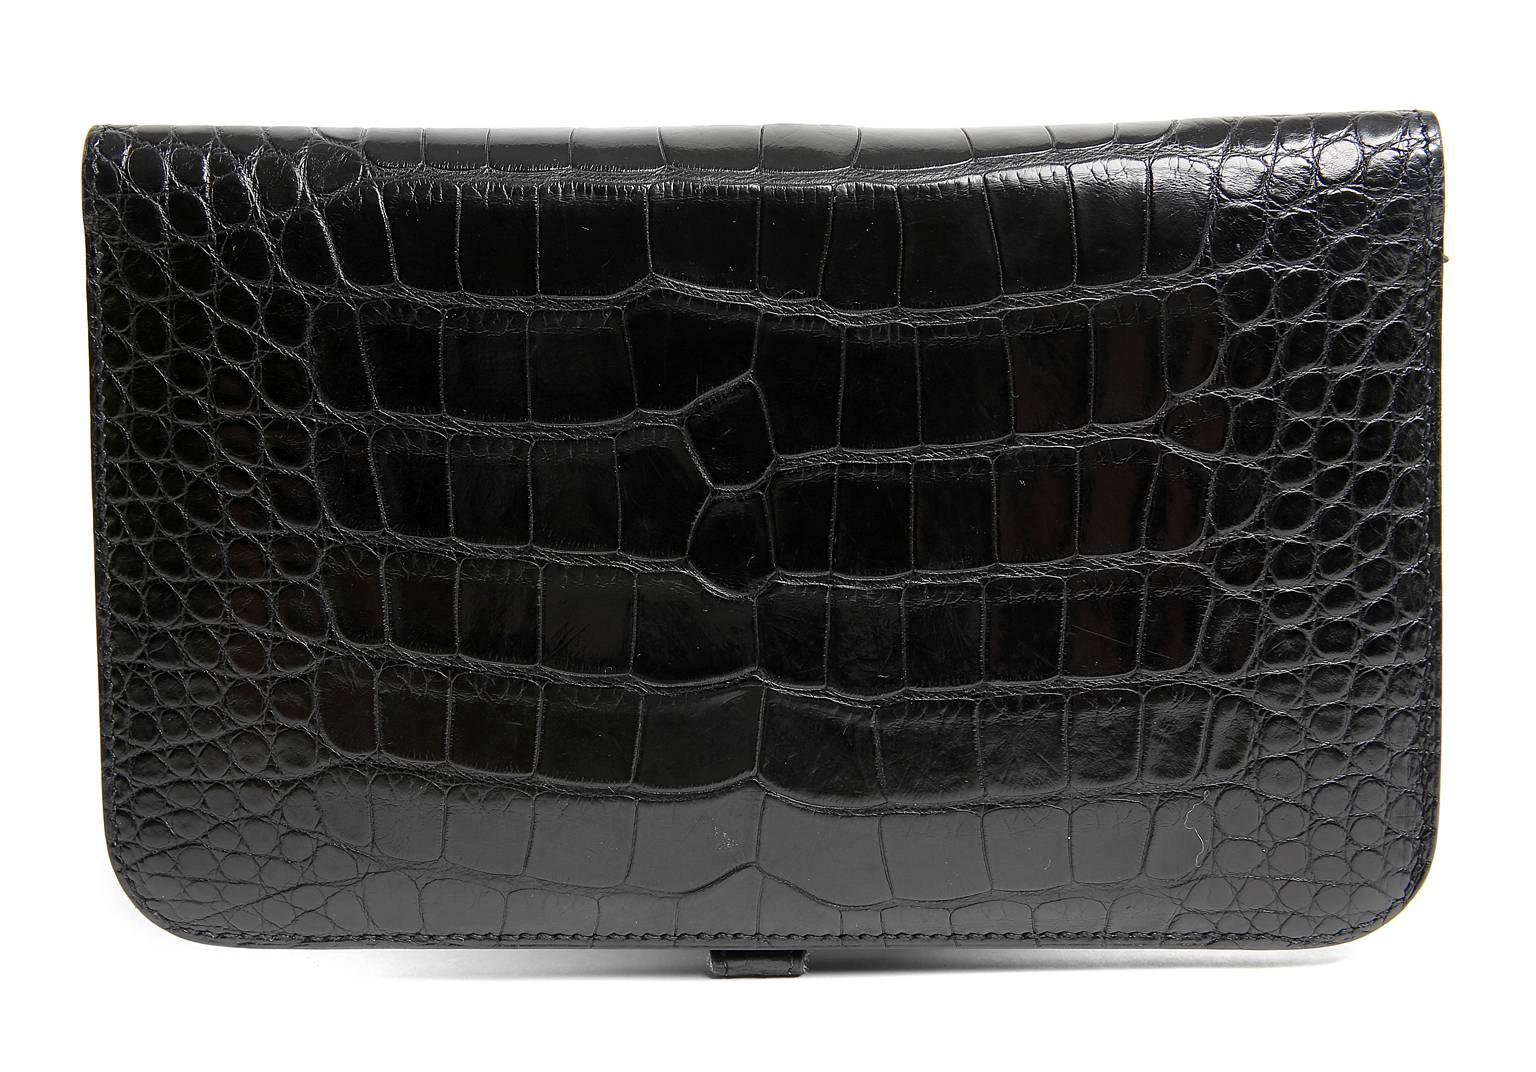 Hermès Black Alligator Dogon Combined Wallet- PRISTINE unworn condition.  The classic style easily organizes all the currency, coins and cards necessary to navigate a busy lifestyle. 
 Alligator, indicated by the square symbol stamp, is one of the